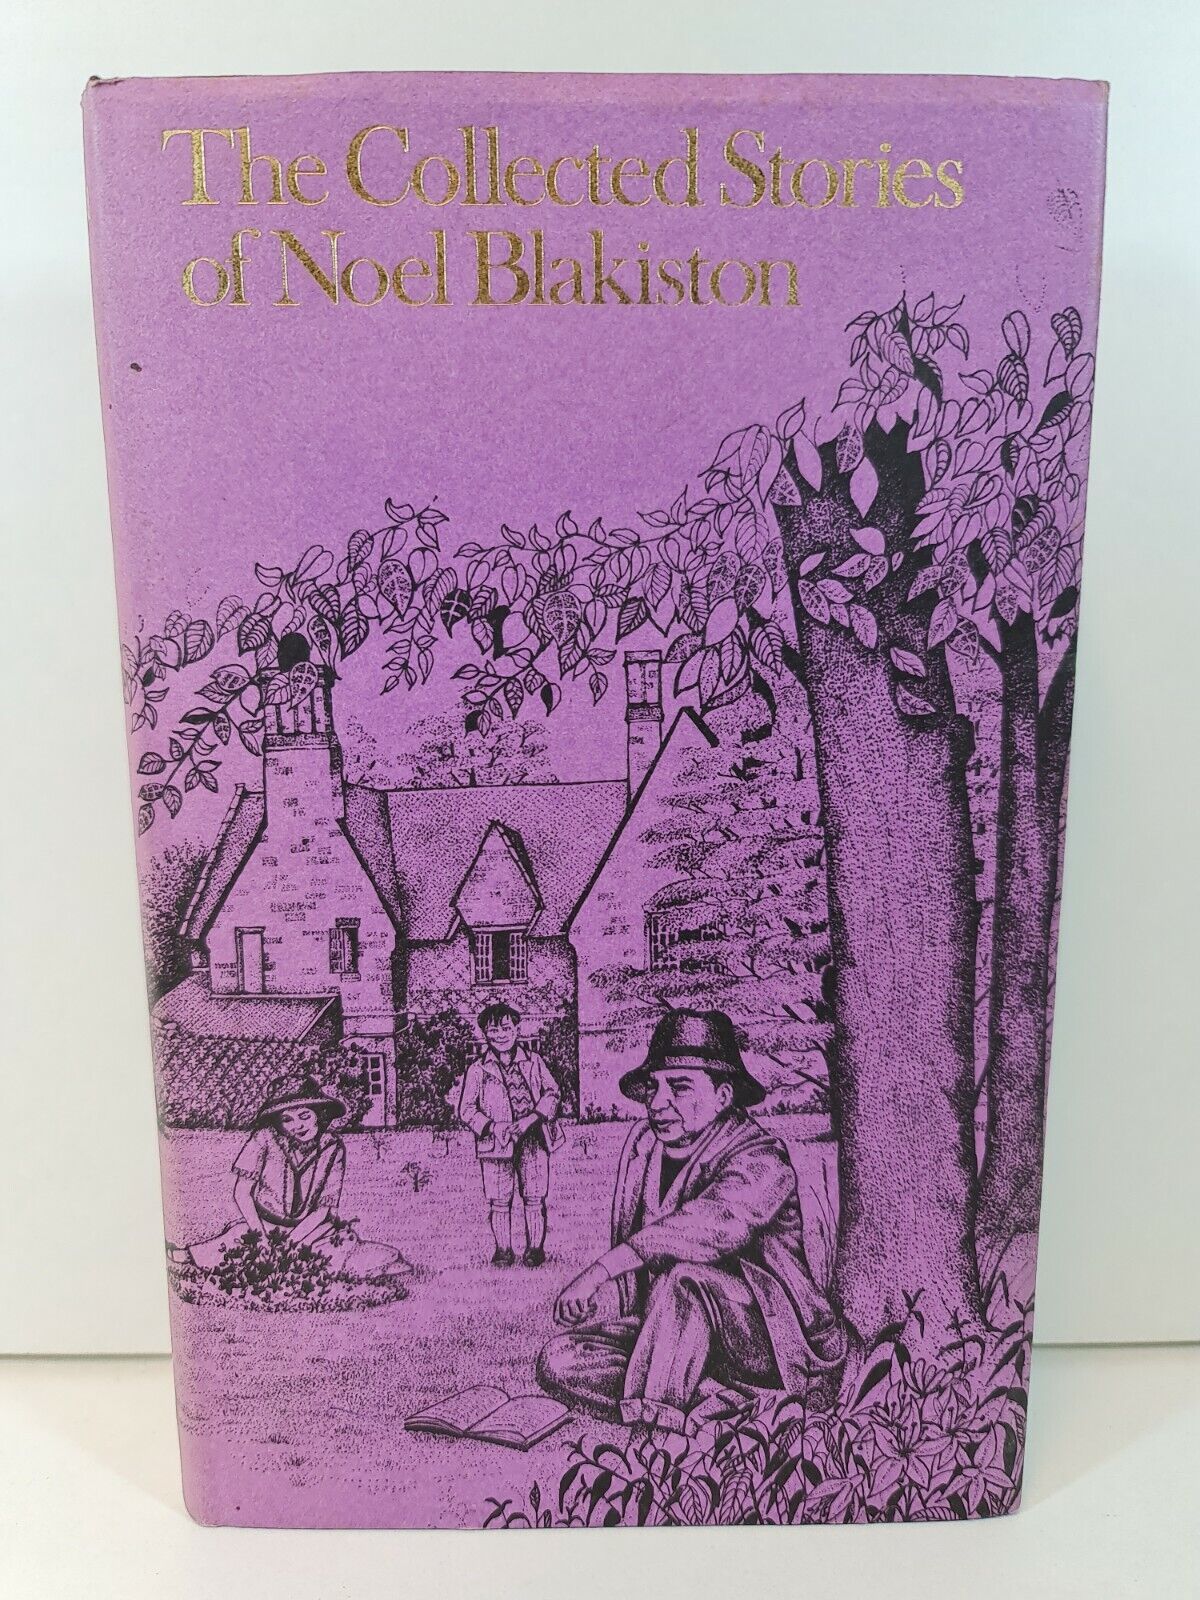 The Collected Stories of Noel Blakiston (1977)